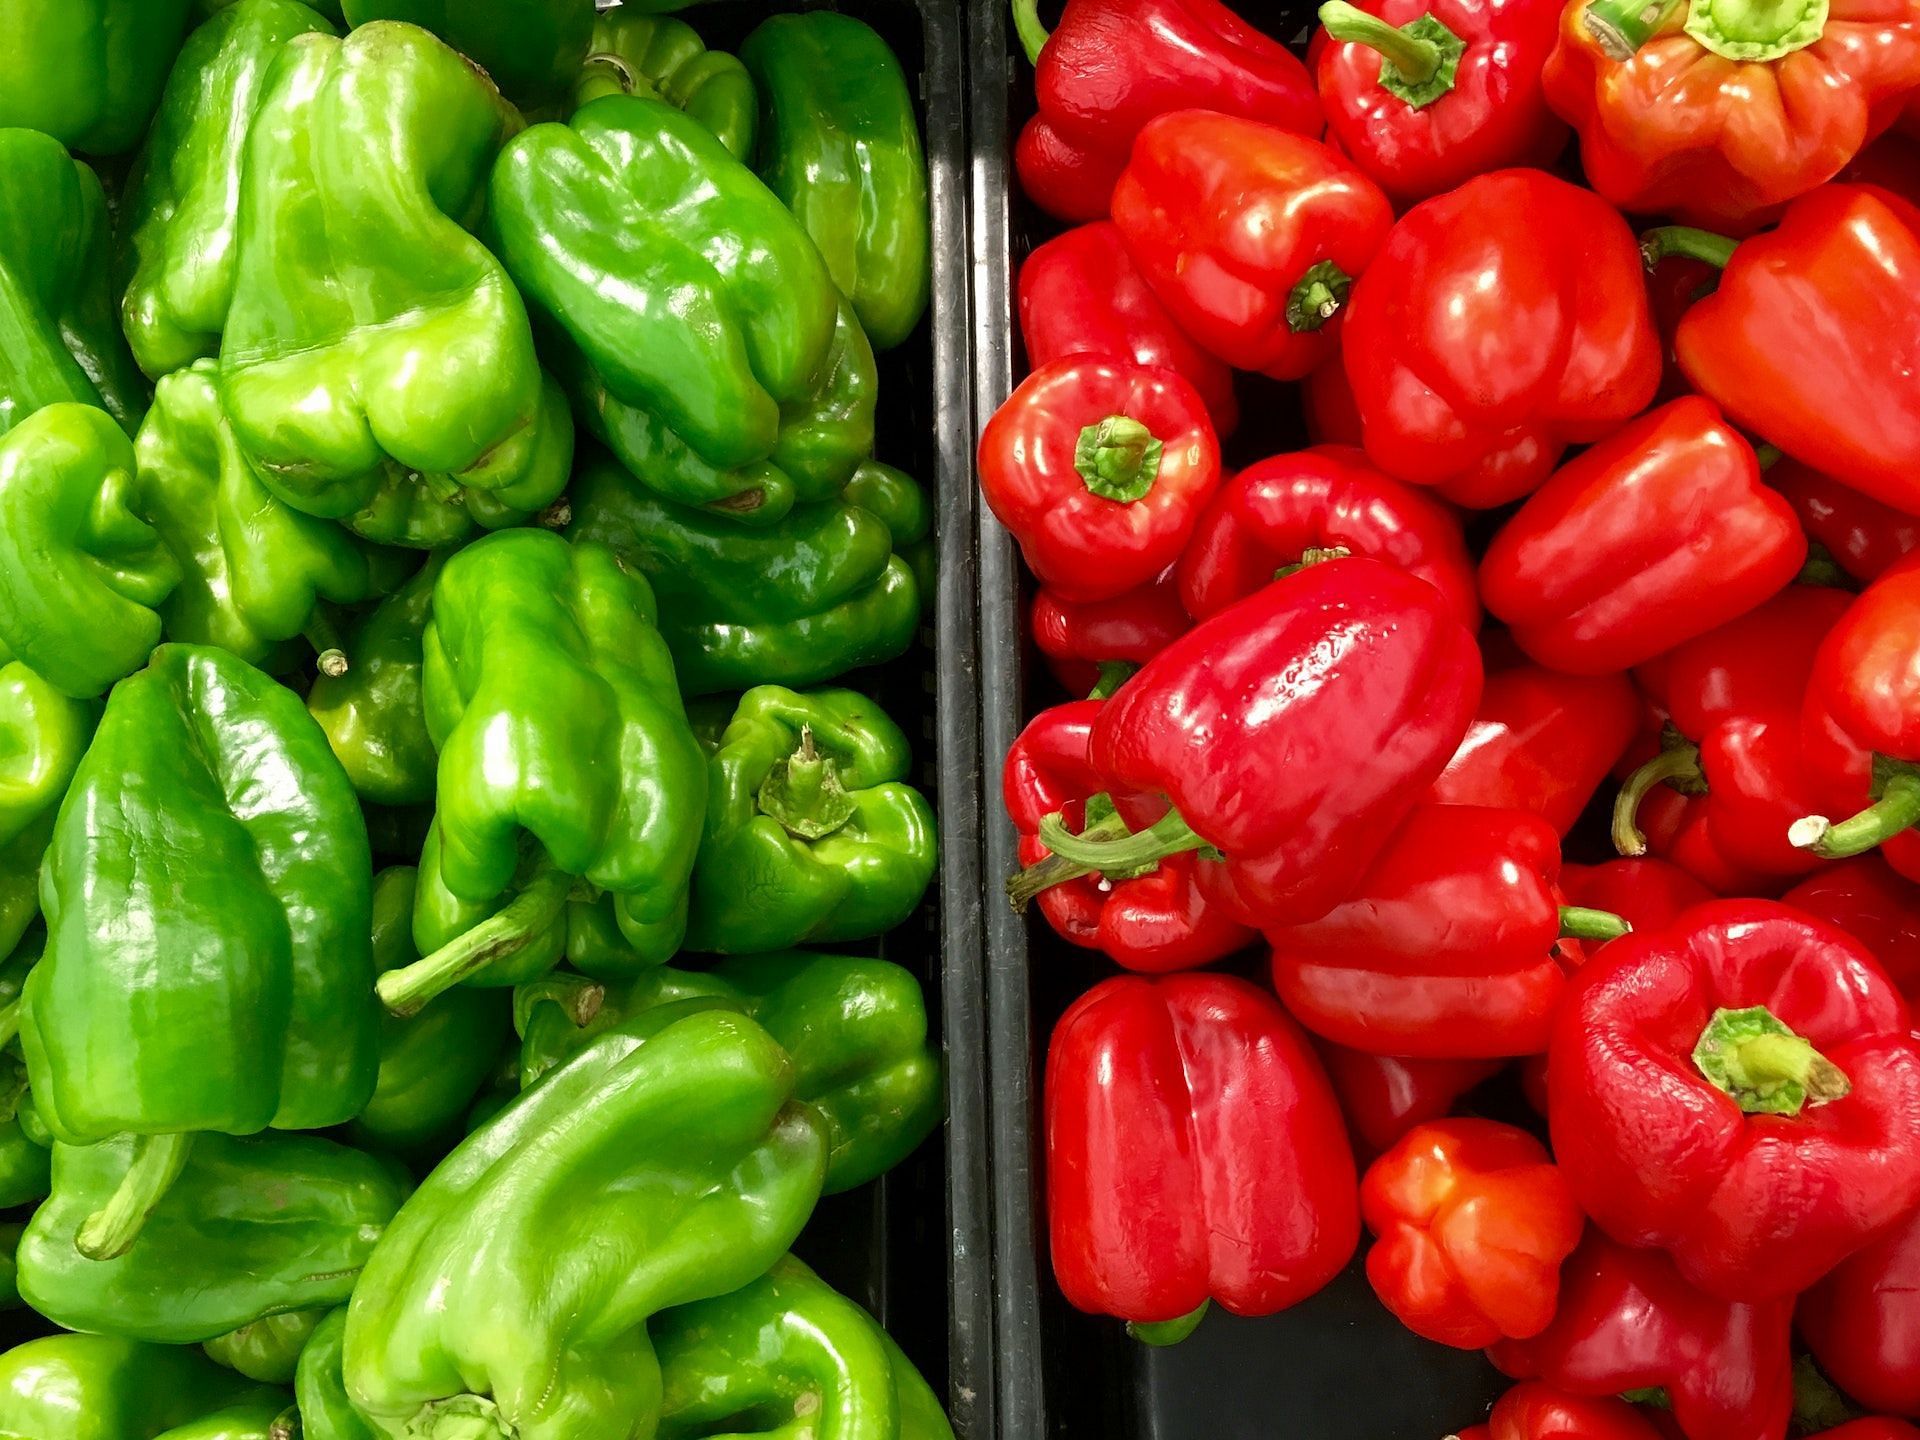 Bell peppers are available in different colors, including yellow, orange, green and red. (Photo via Pexels/Rafel AL Saadi)